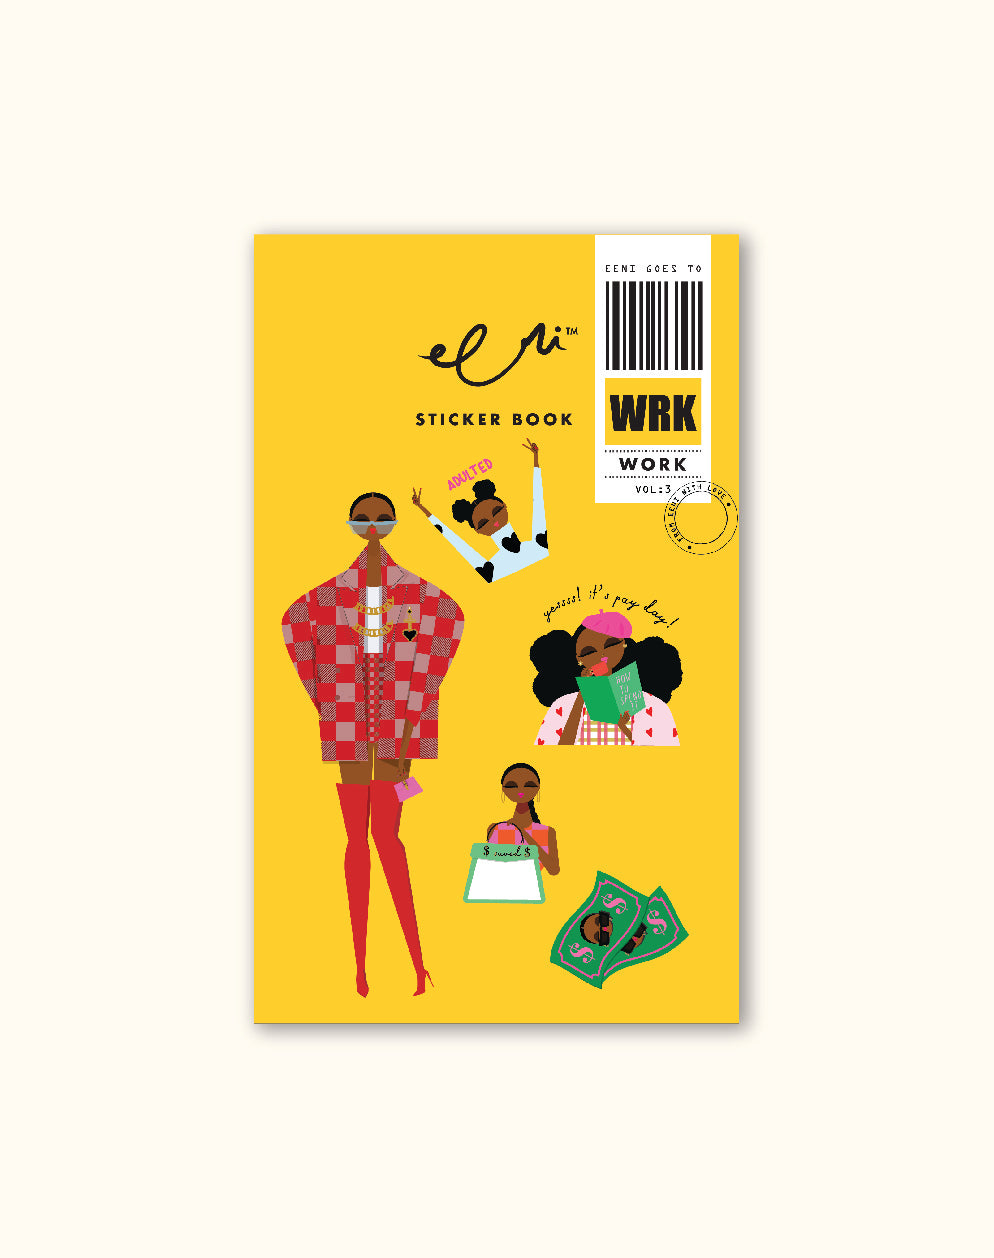 Black Girl Magic sticker book. Cover shows Black Girl illustrated character Eeni going to work, Black girl dollars, Black girl pay day, Black girl in fashionista outfit